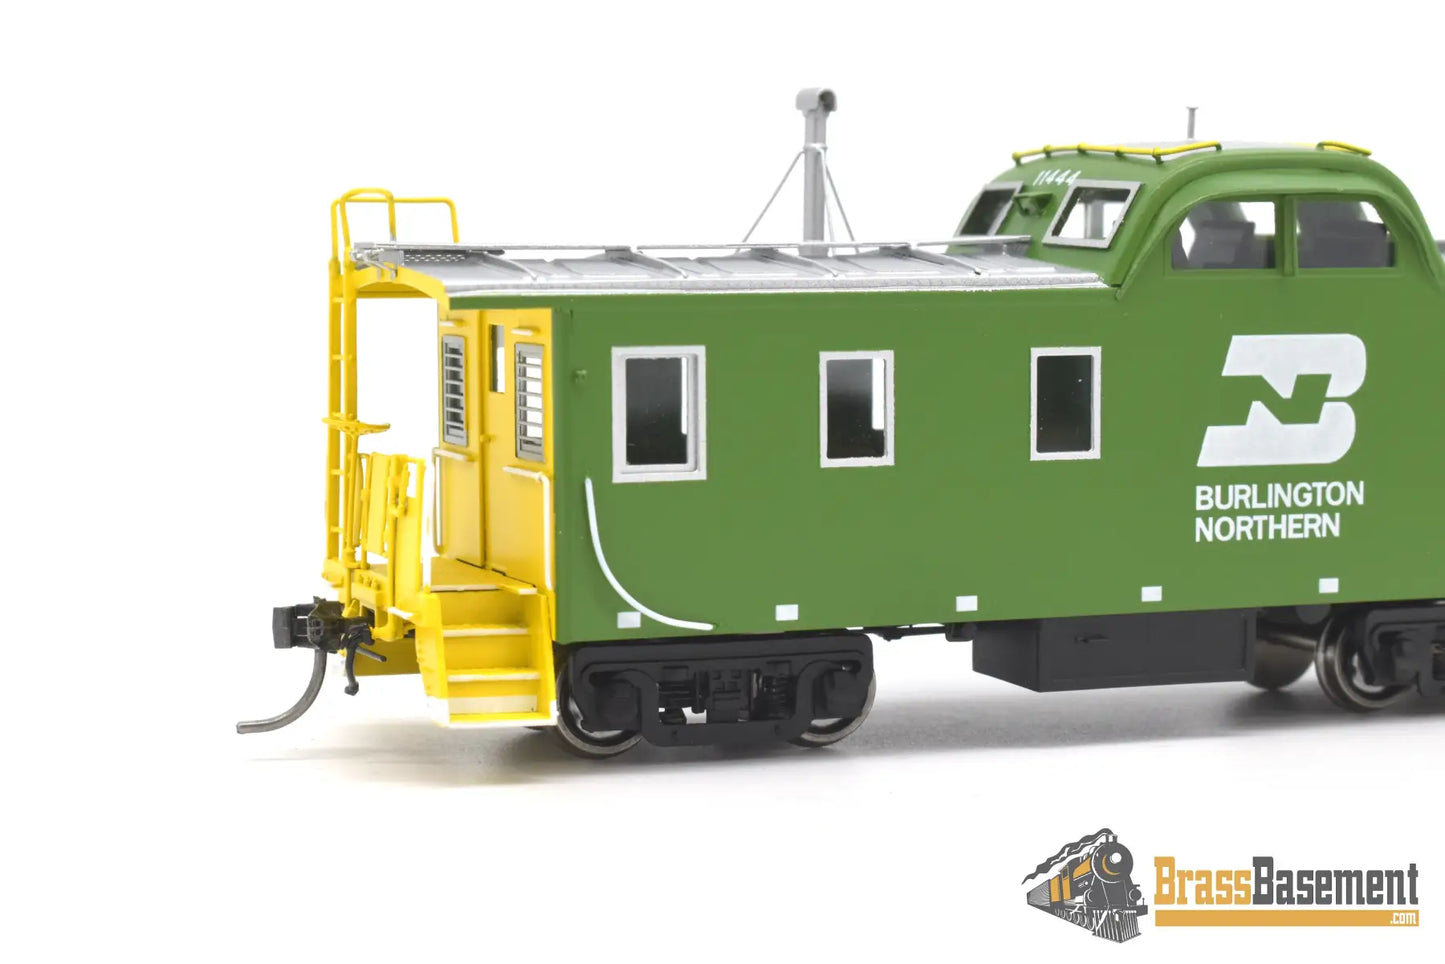 Ho Brass - Dp - 4380.1 Division Point Burlington Northern Bn #11444 Ex Gn X310 Green! New Caboose